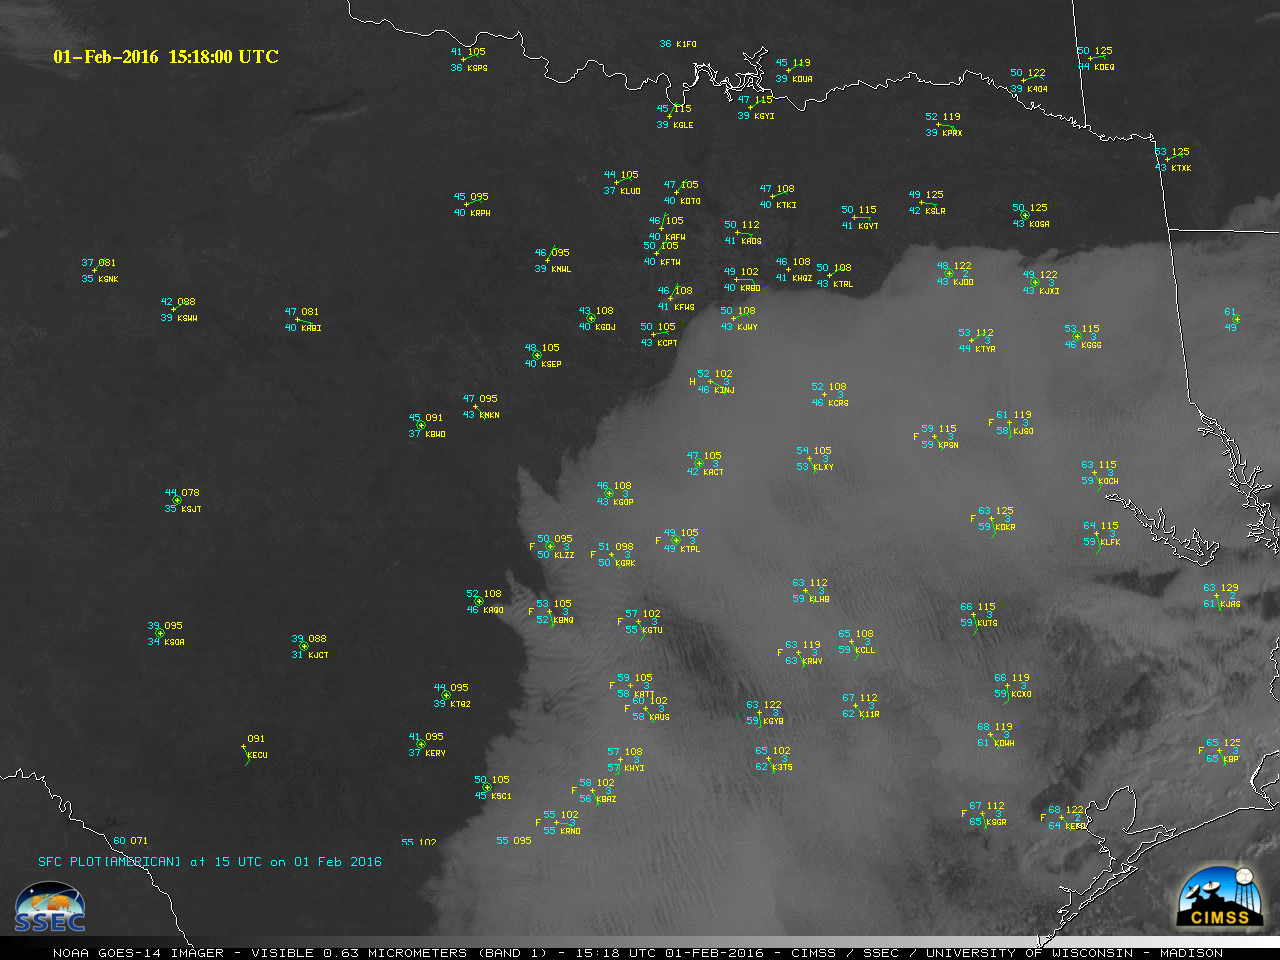 GOES-14 Visible (0.63 µm) images, with surface observations [click to play MP4 animation]